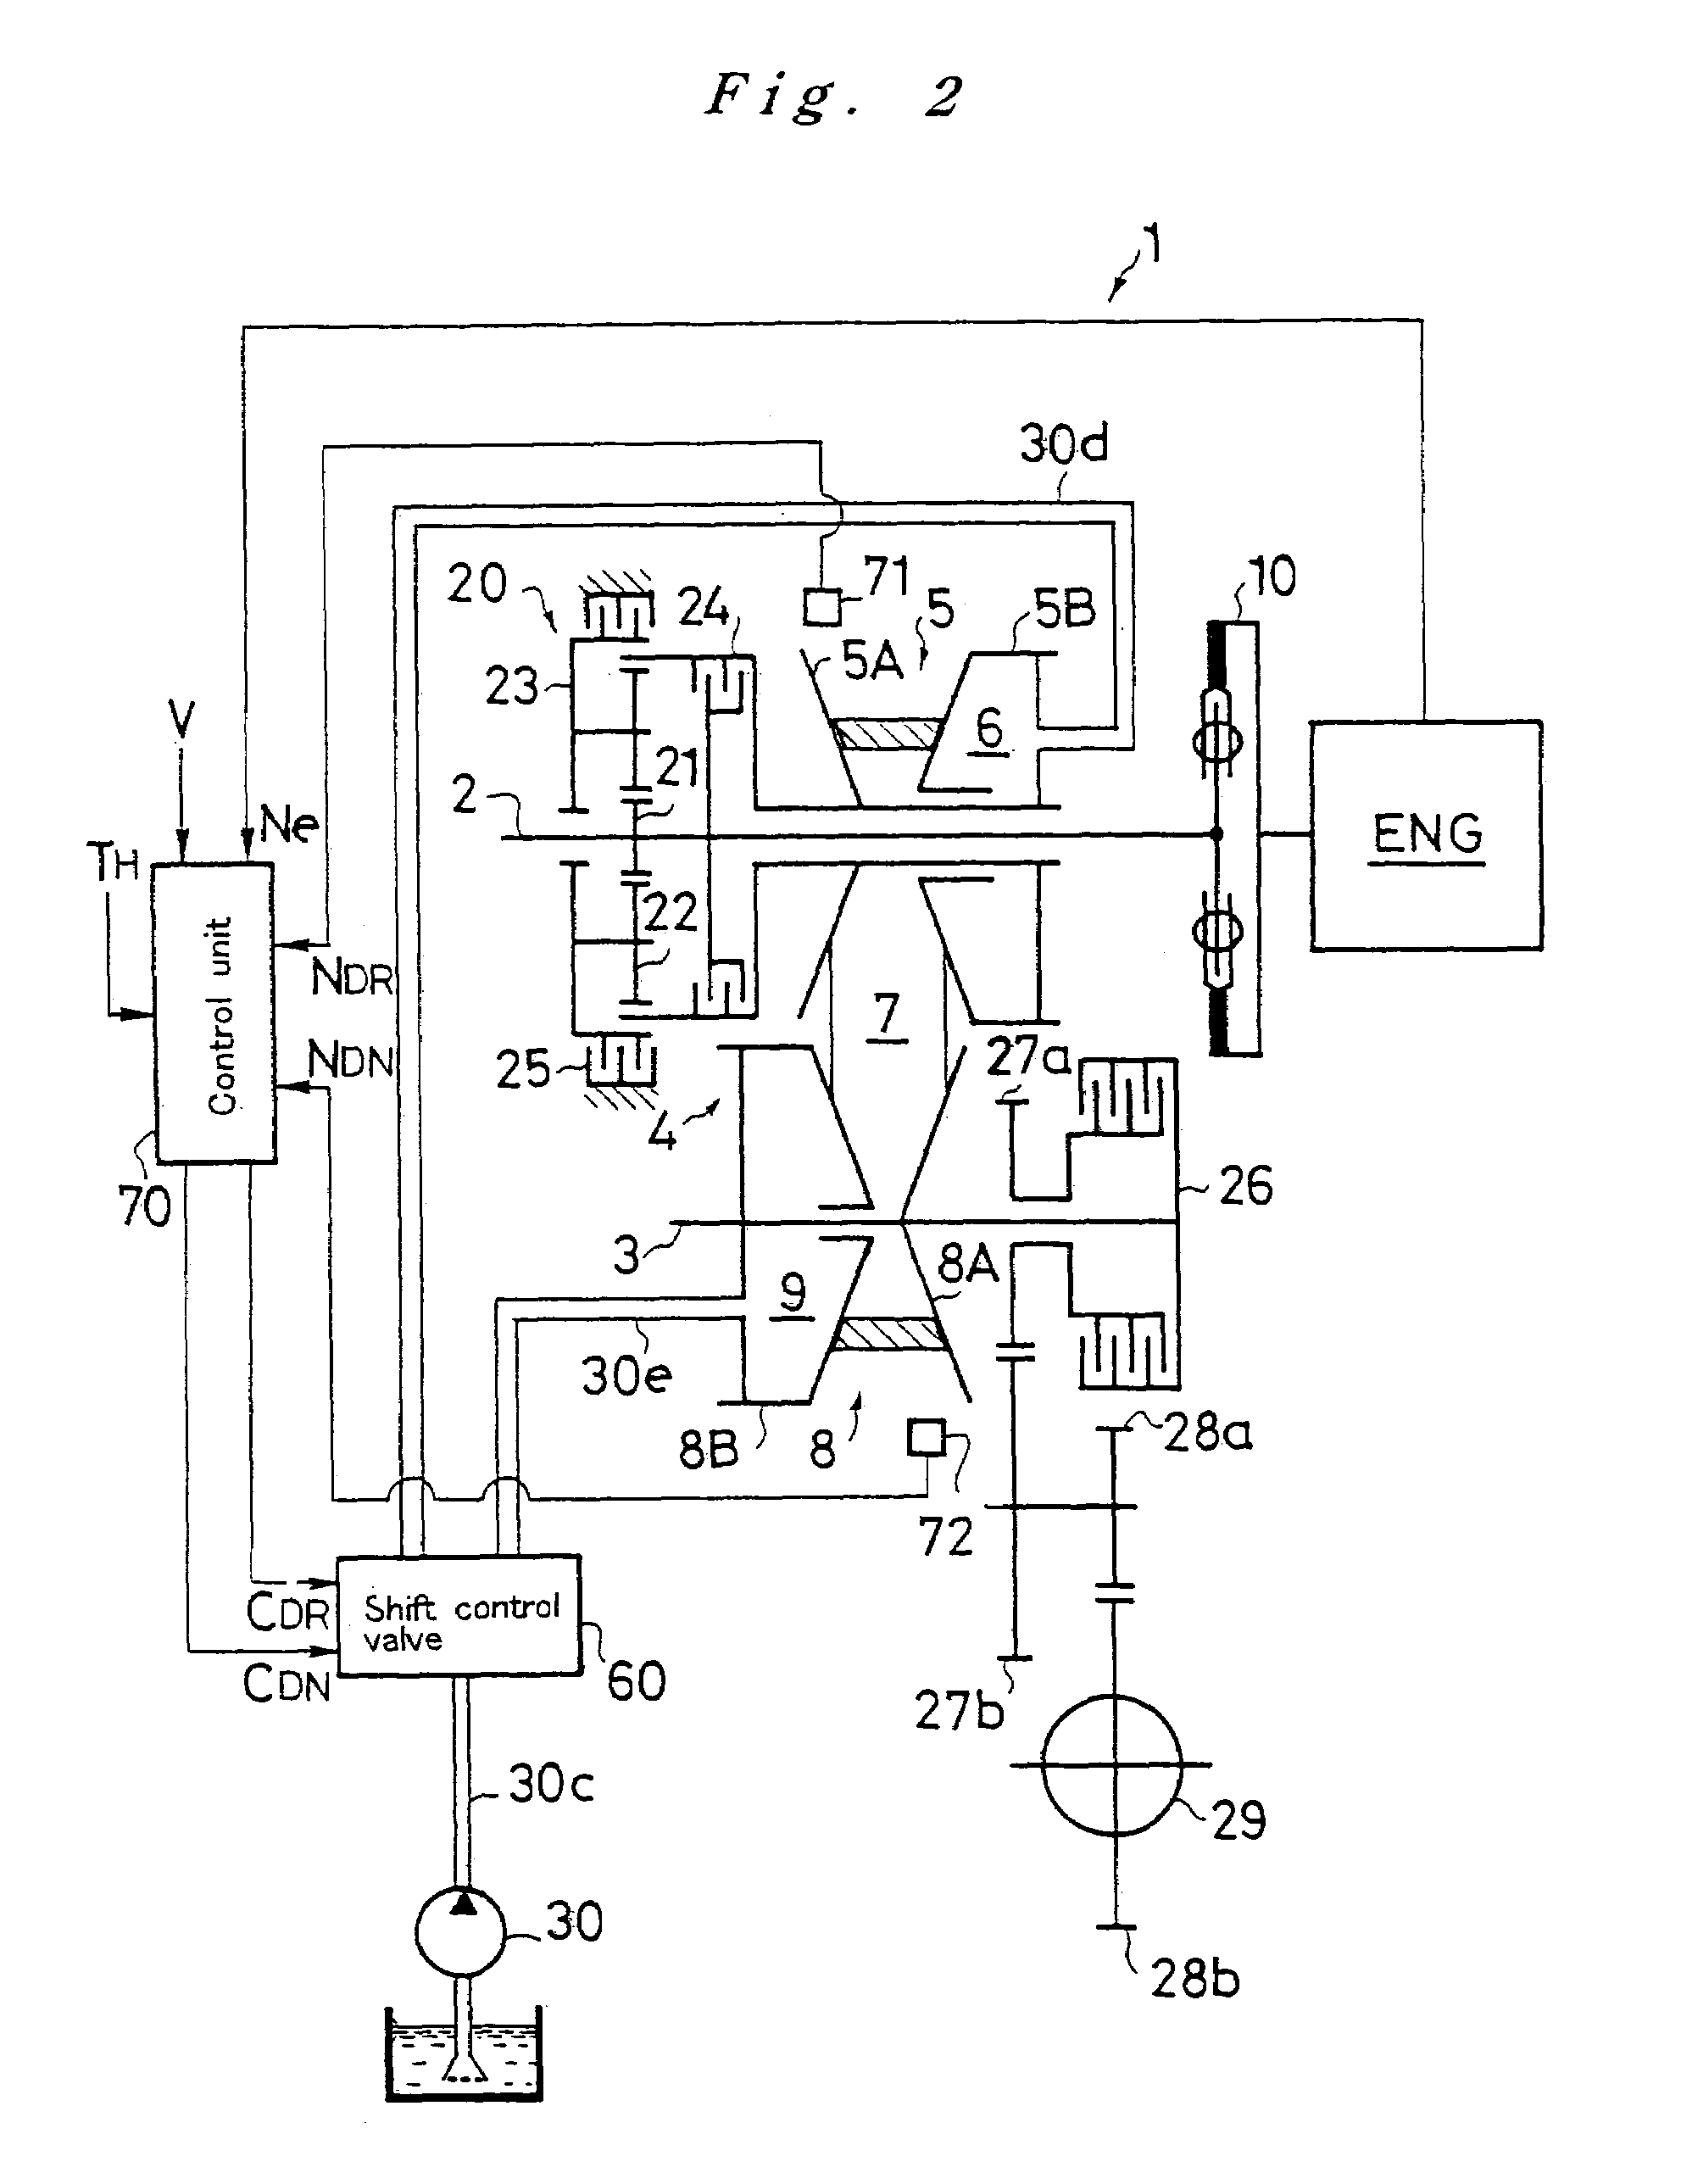 Belt type continuously variable transmission